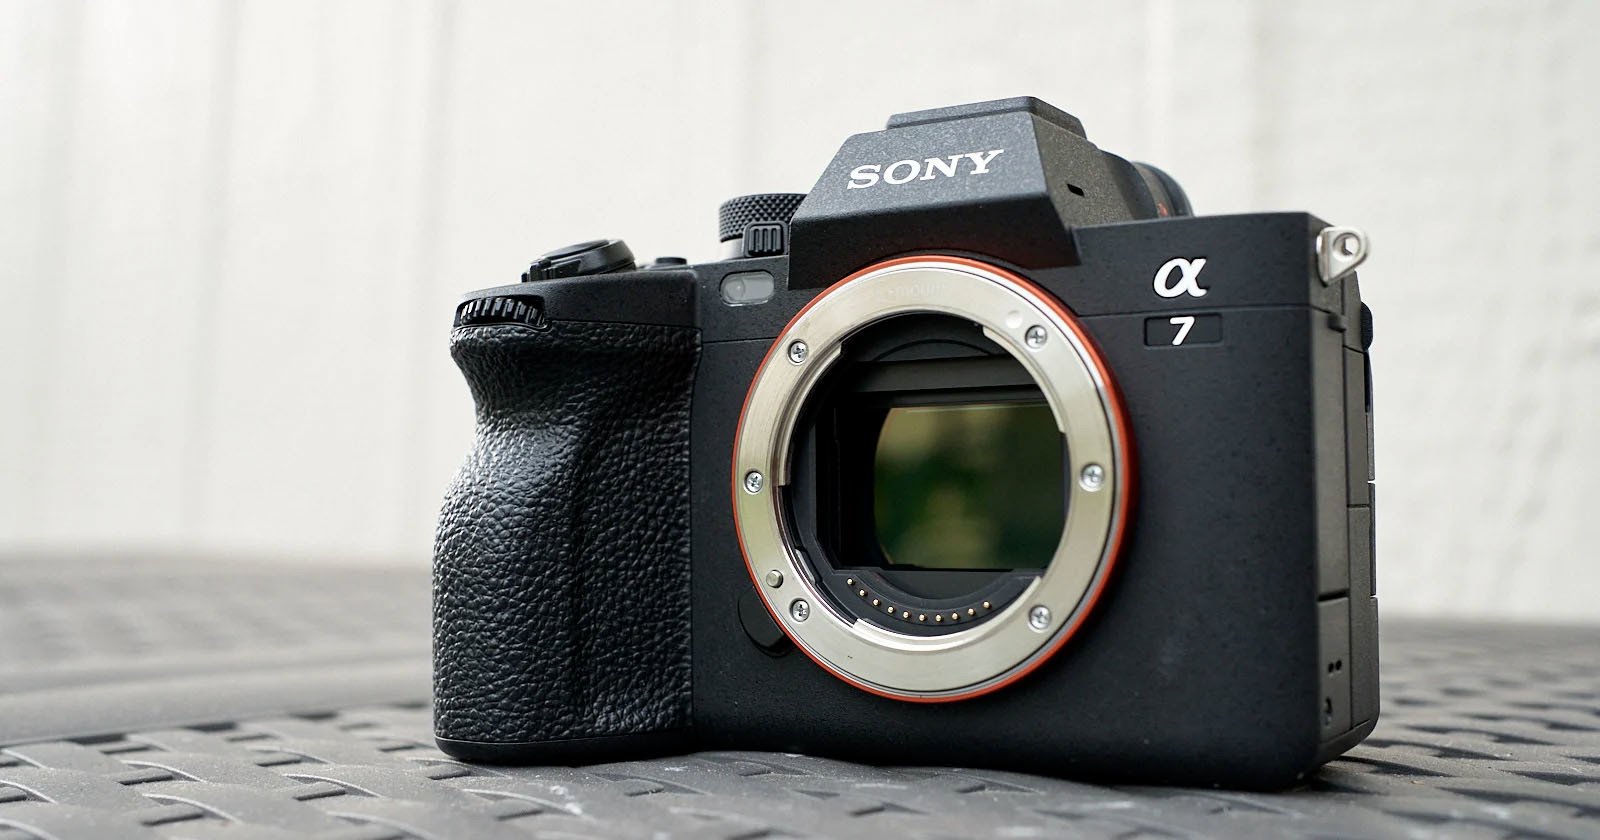  sony alpha firmware update adds lossless raw 